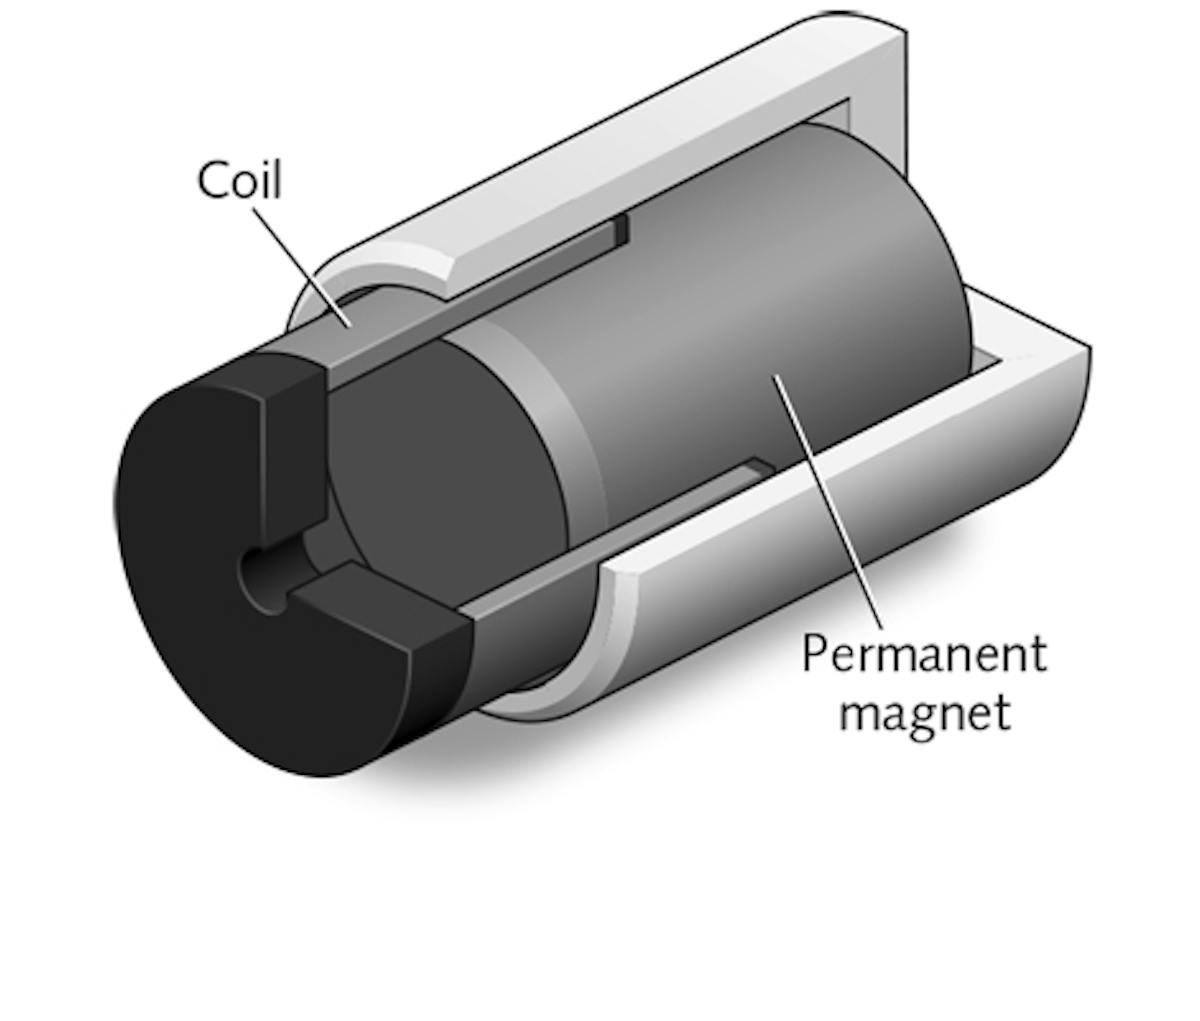 FIGURE 1. The moving-coil type of voice-coil actuator is widely used.